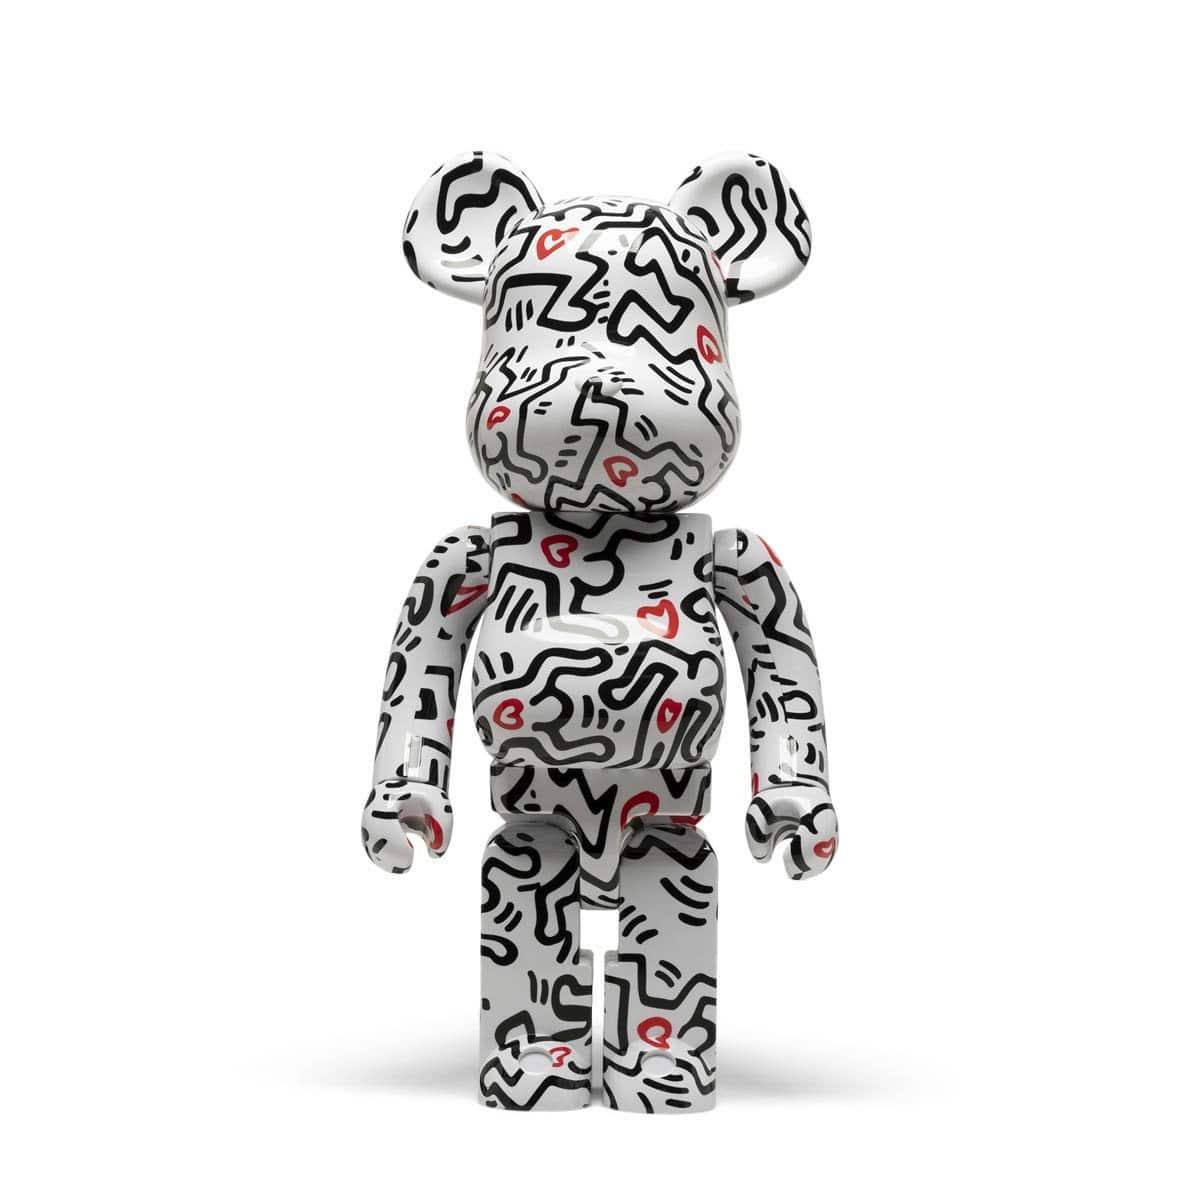 Medicom Toy Odds & Ends MULTI / O/S BE@RBRICK KEITH HARING #8 1000%